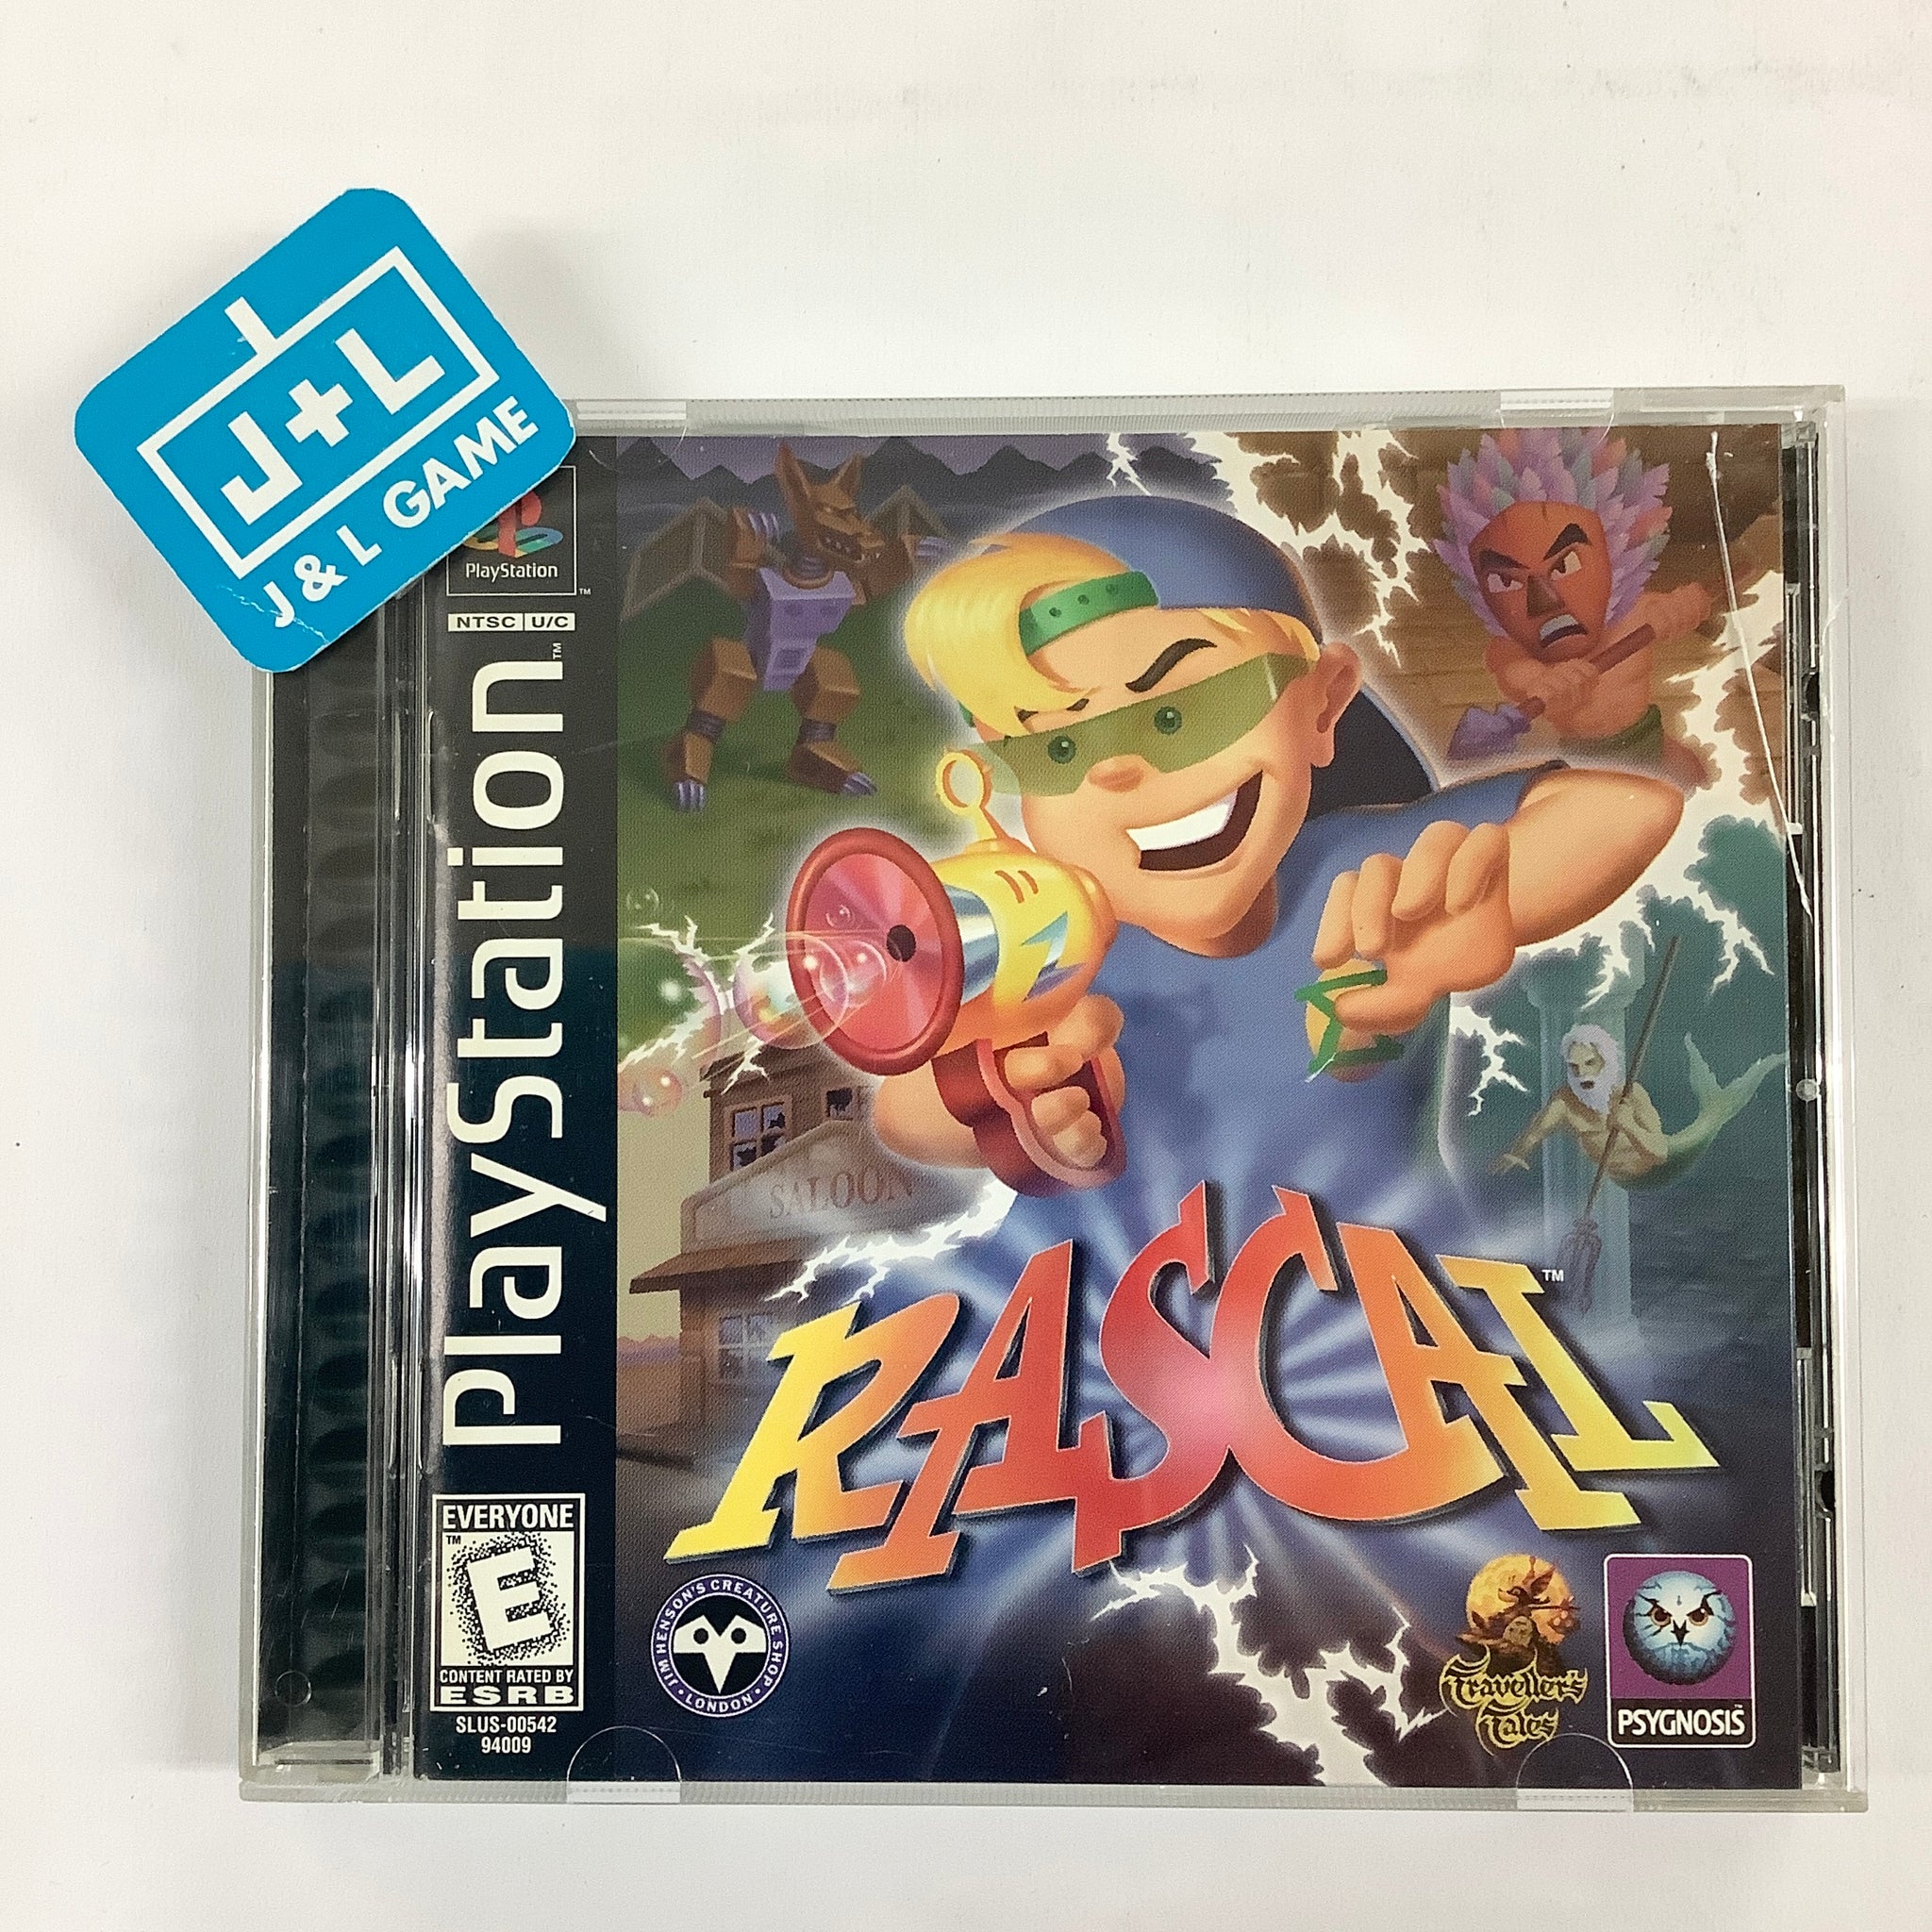 Rascal - (PS1) PlayStation 1 [Pre-Owned] – J&L Video Games New